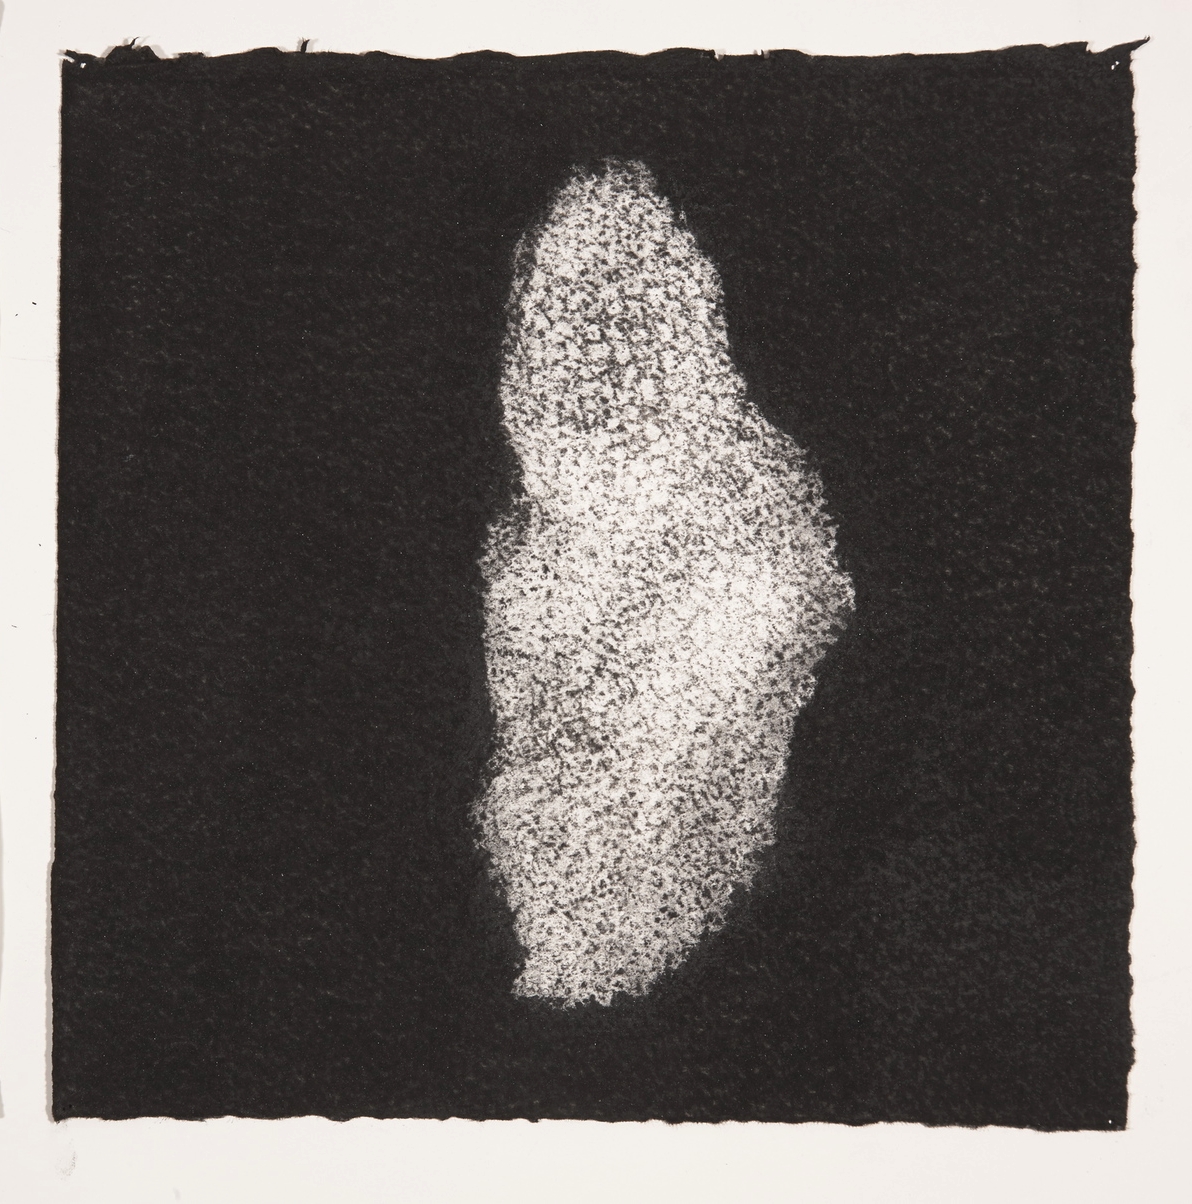  Coral, 2014, charcoal on paper, 19x19cm 